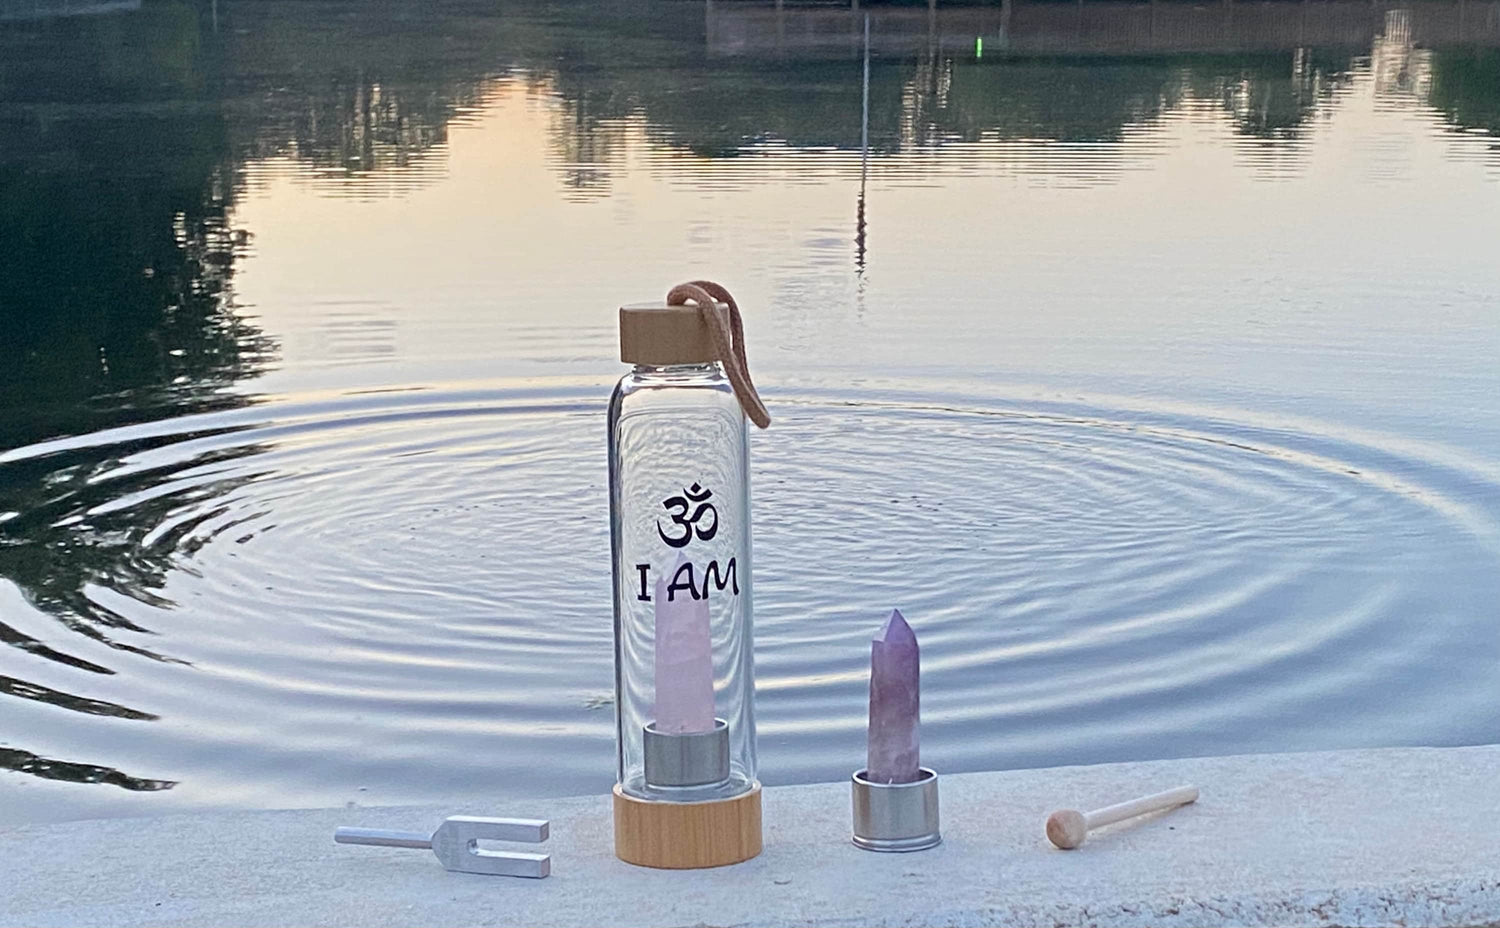 OM - I AM Crystal Infusion Kit - Resonator 4096 Hz Crystal Tuner Vibration Rose Quartz And Amethyst Wand Point Inserts, Glass, Bamboo